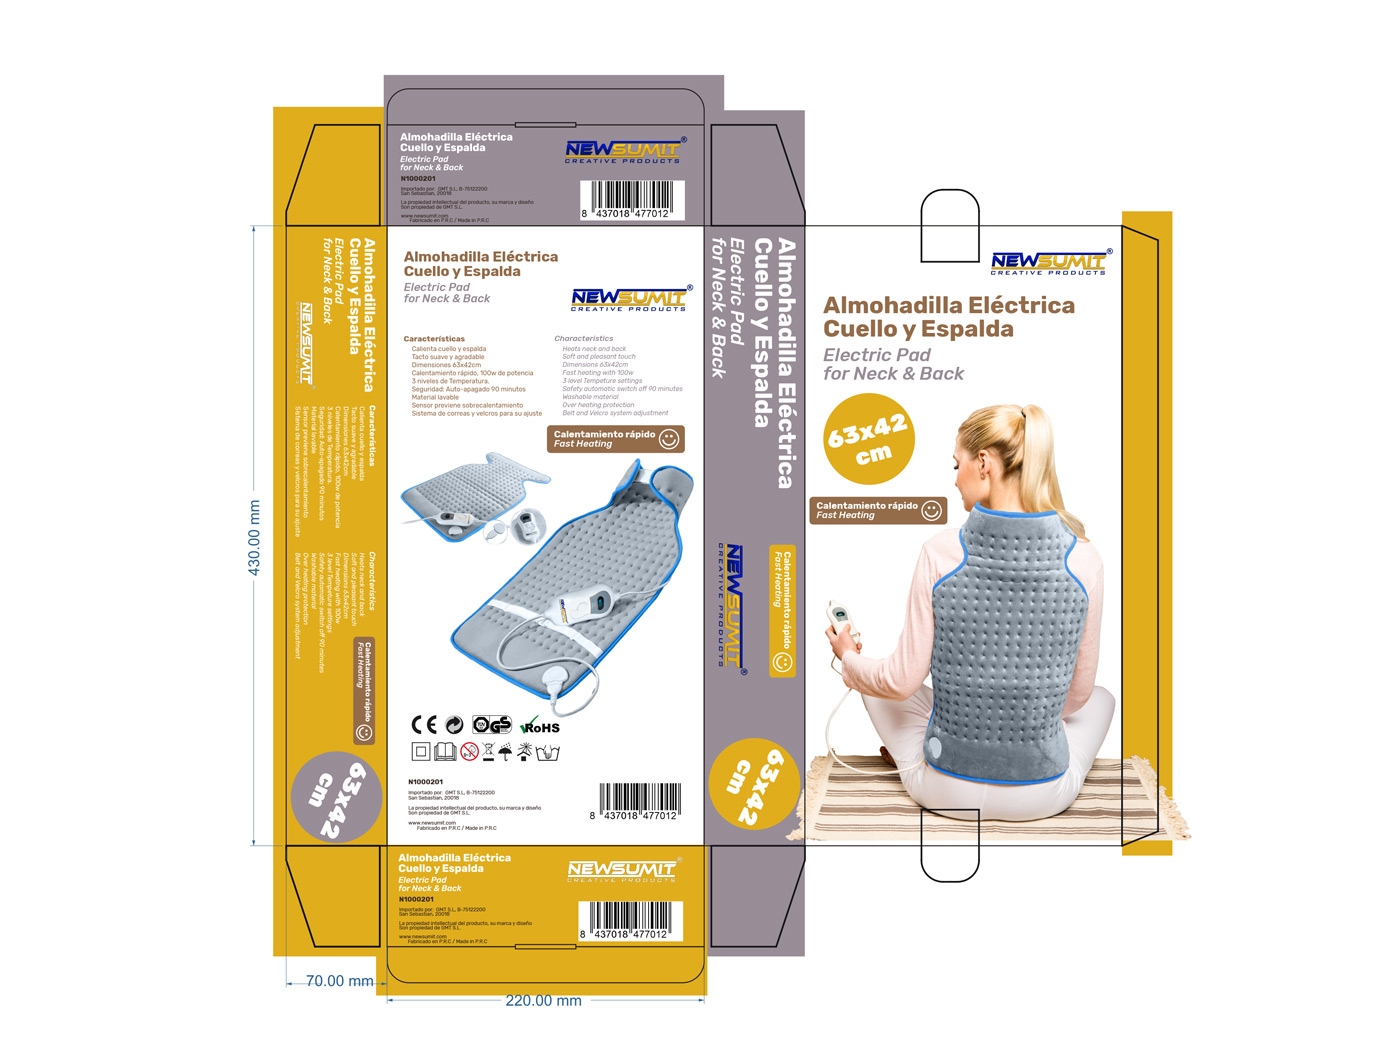 Portfolio of graphic and creative design works of boxes and packaging for pharmacy and laboratory products